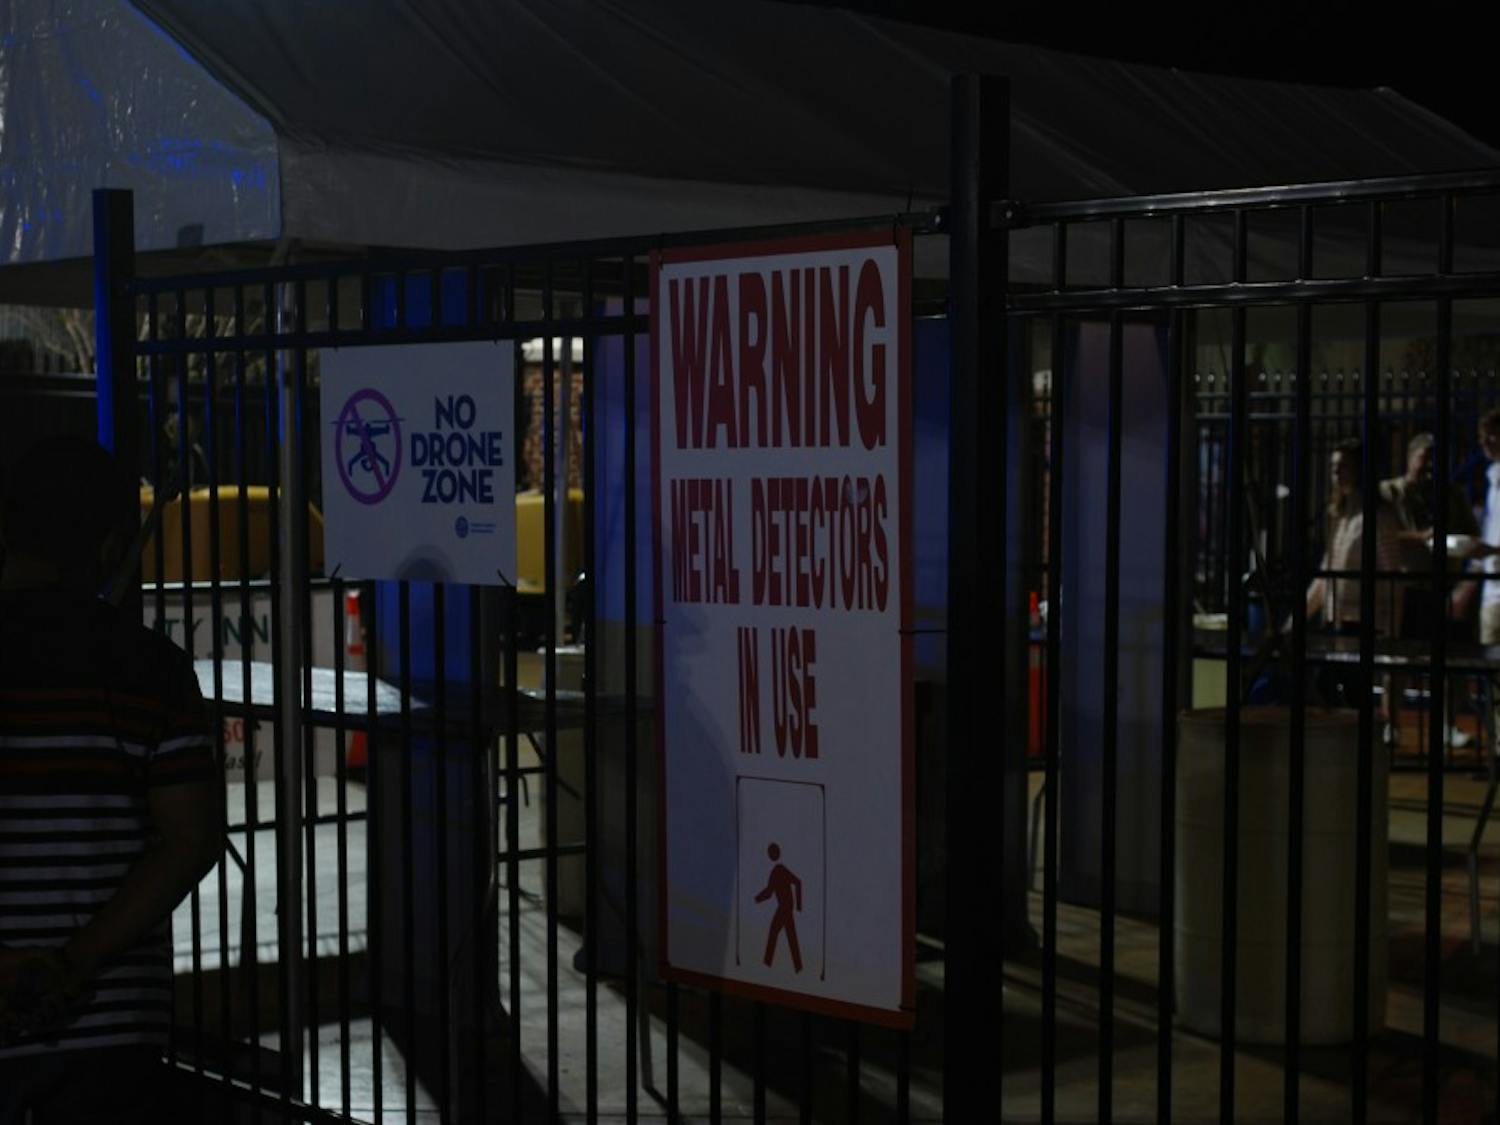 The SC State Fair put up metal detectors at its entrances since a shooting in 2004, according to The State.